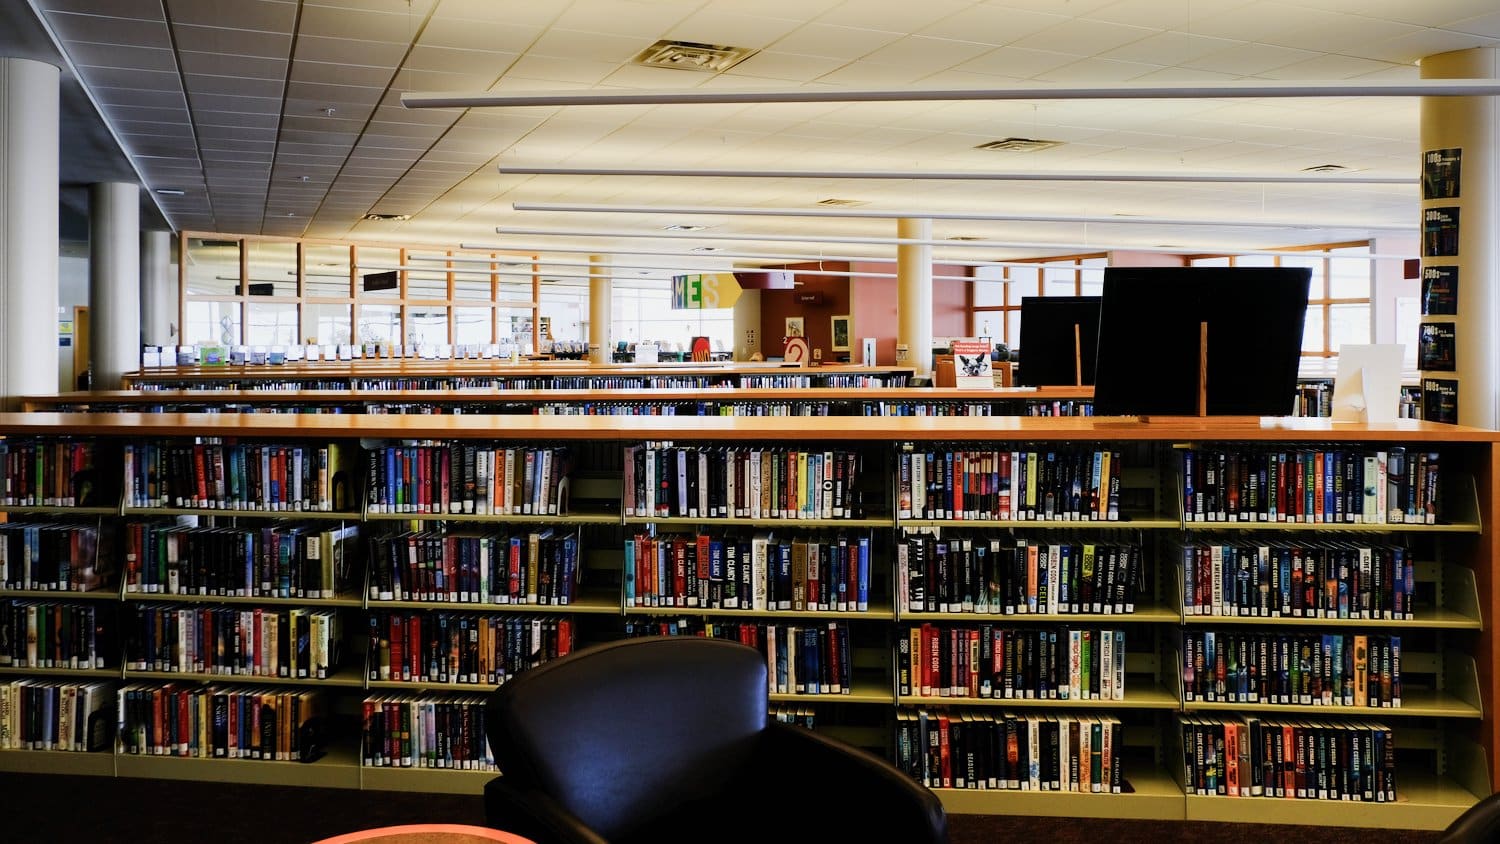 Low shelves allow light to flow through the libary.